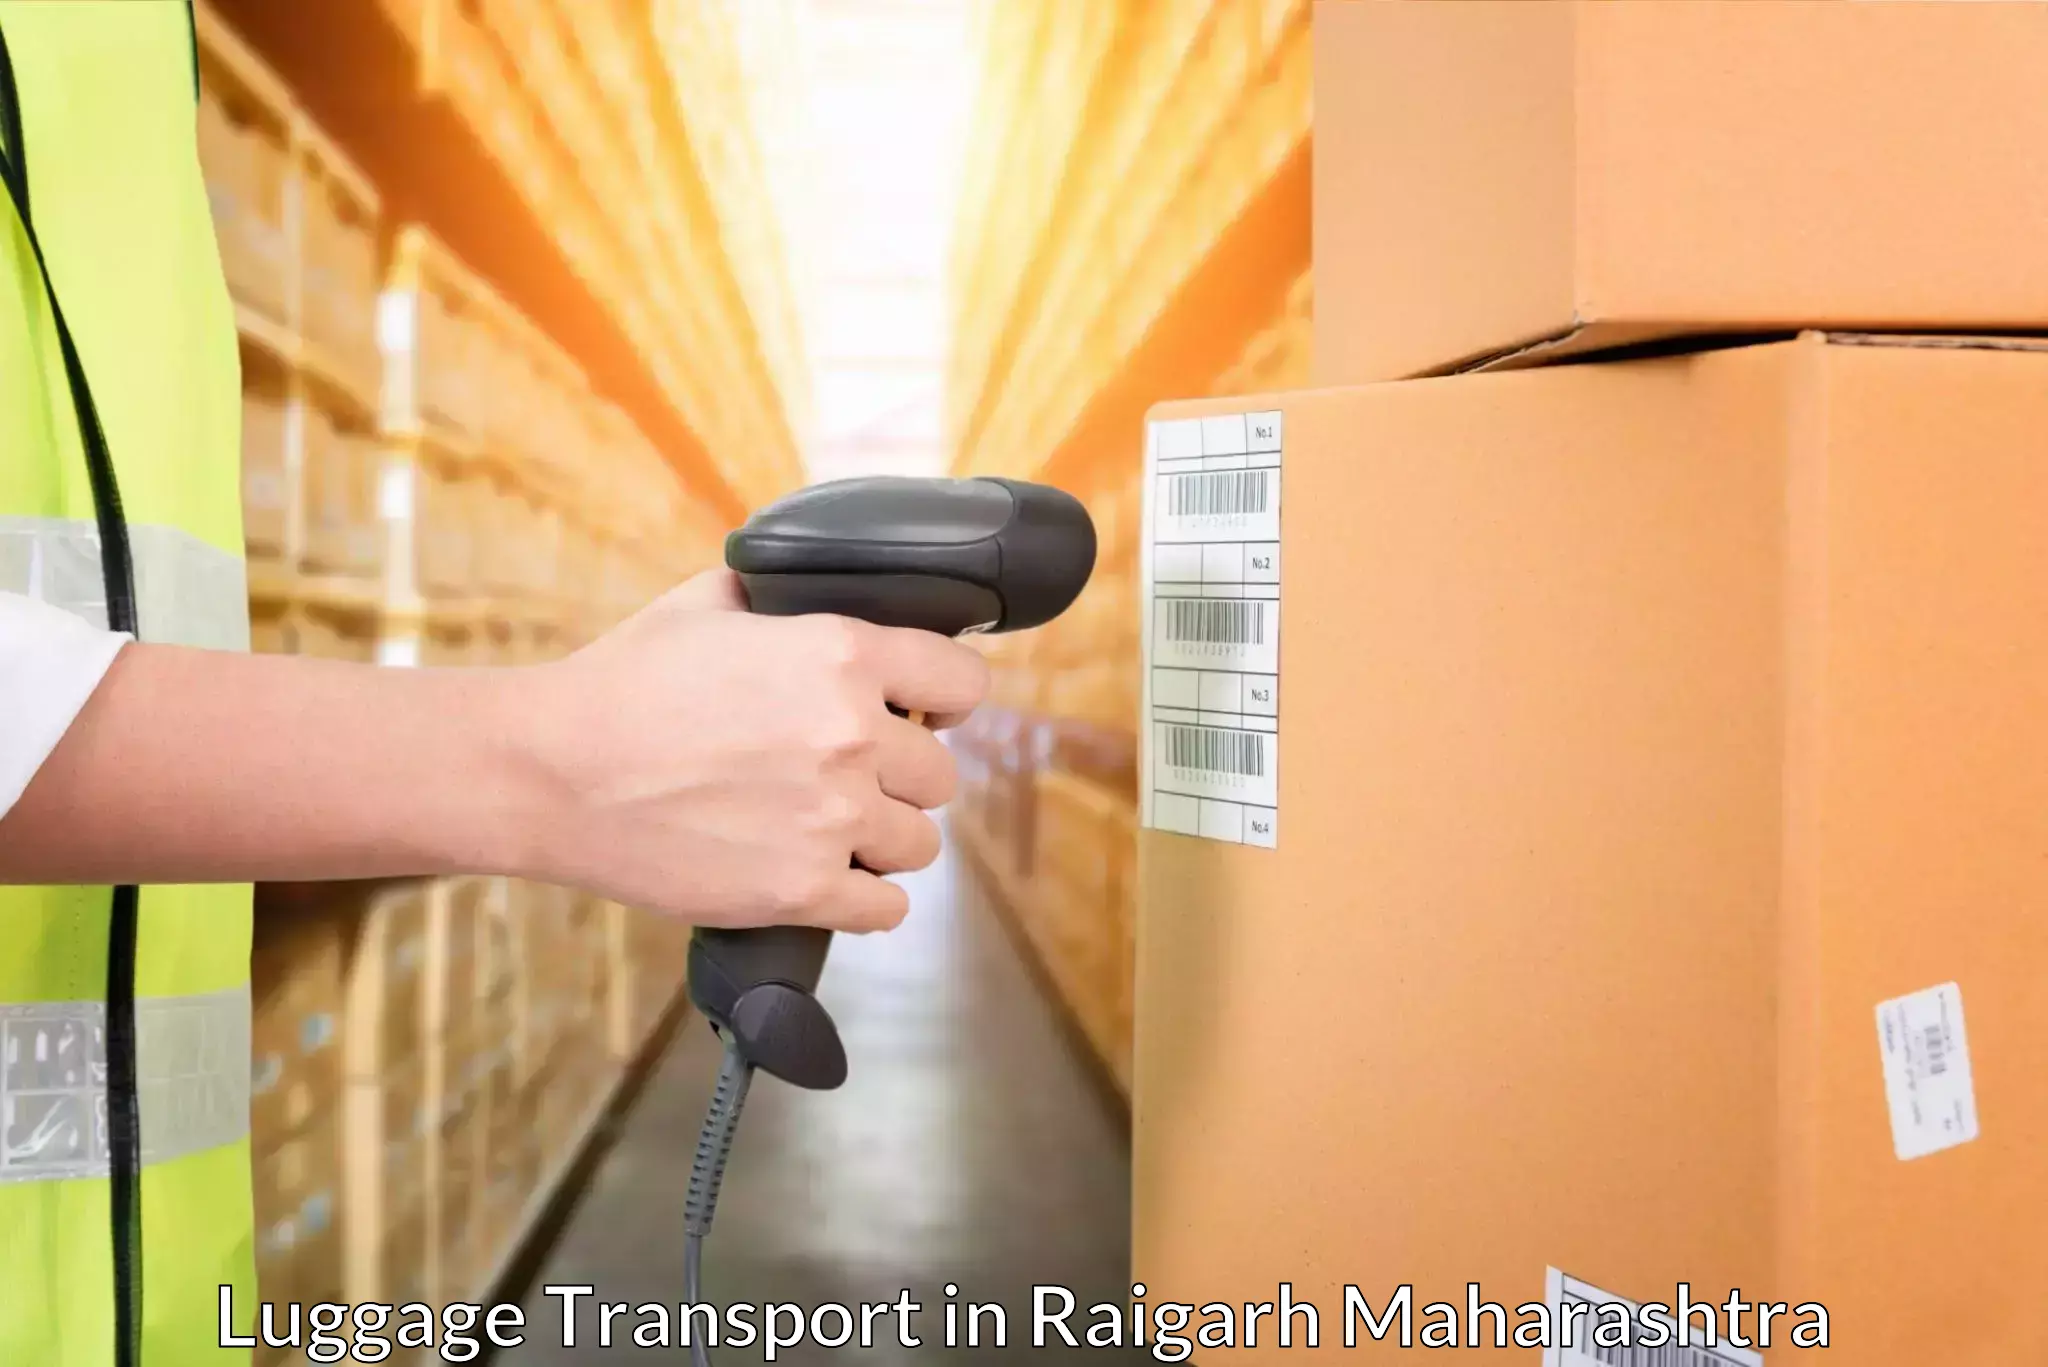 Luggage delivery system in Raigarh Maharashtra